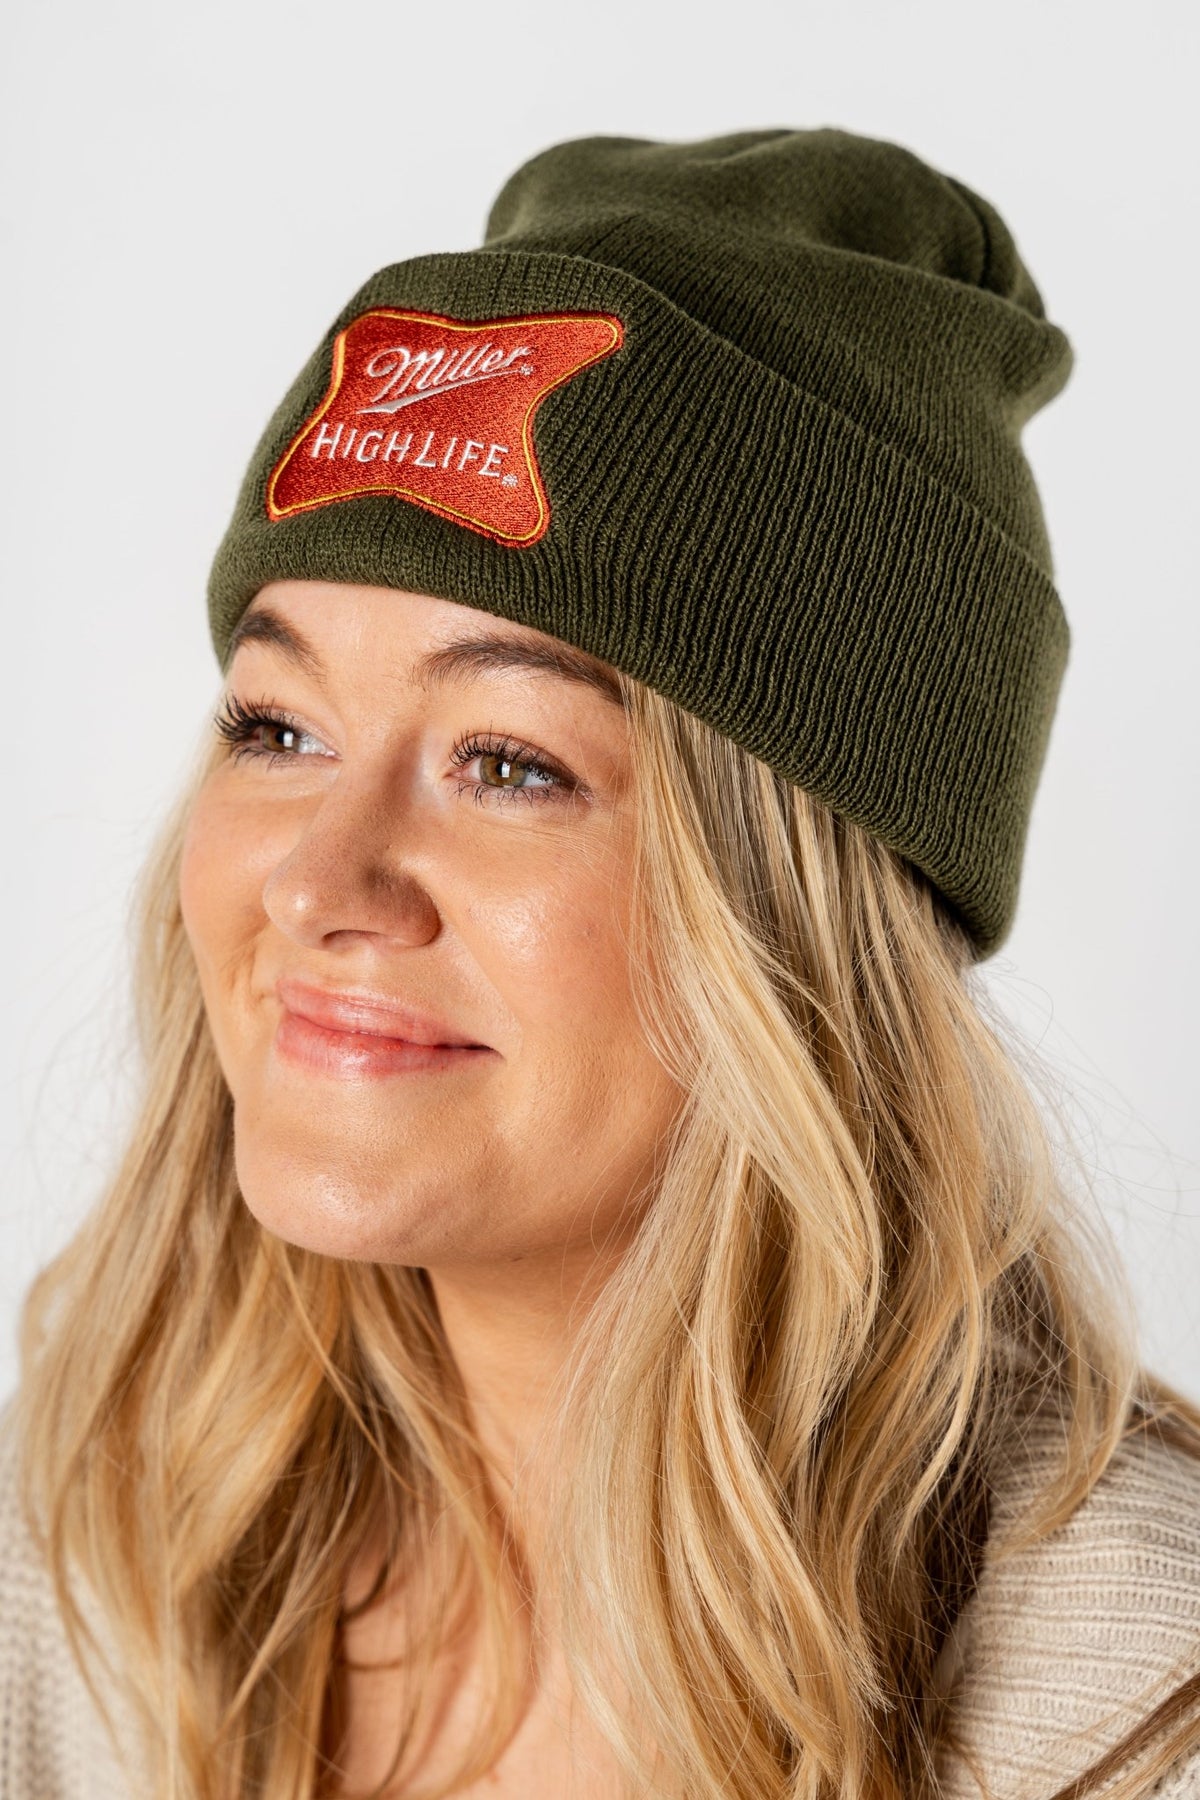 Miller high life cuffed knit beanie olive - Trendy Gifts at Lush Fashion Lounge Boutique in Oklahoma City